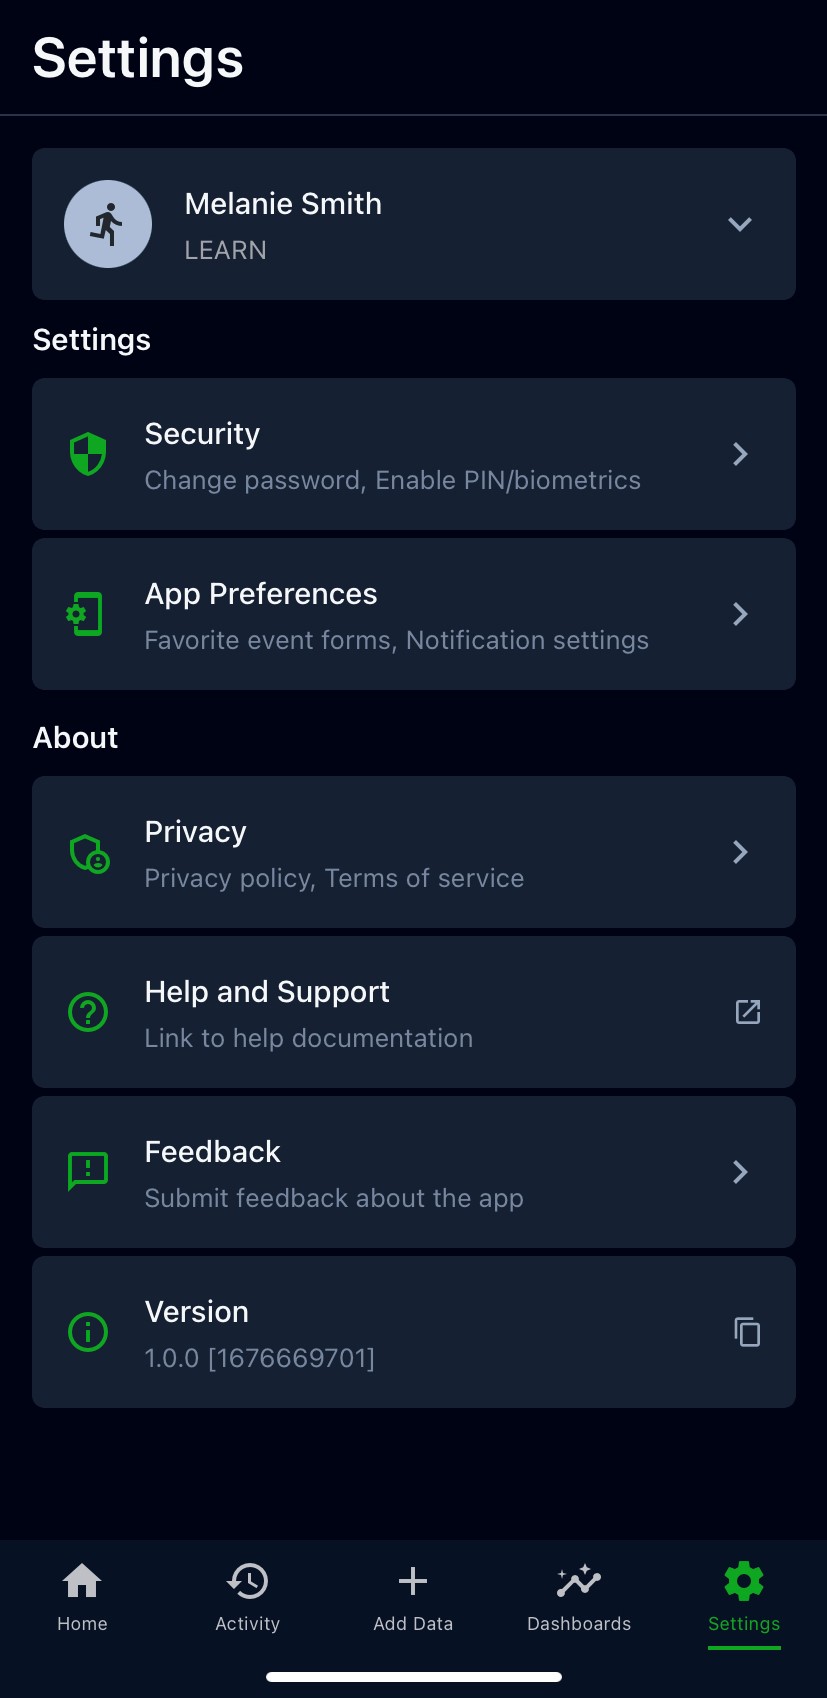 A screenshot of the Settings tab in the Smartabase app.